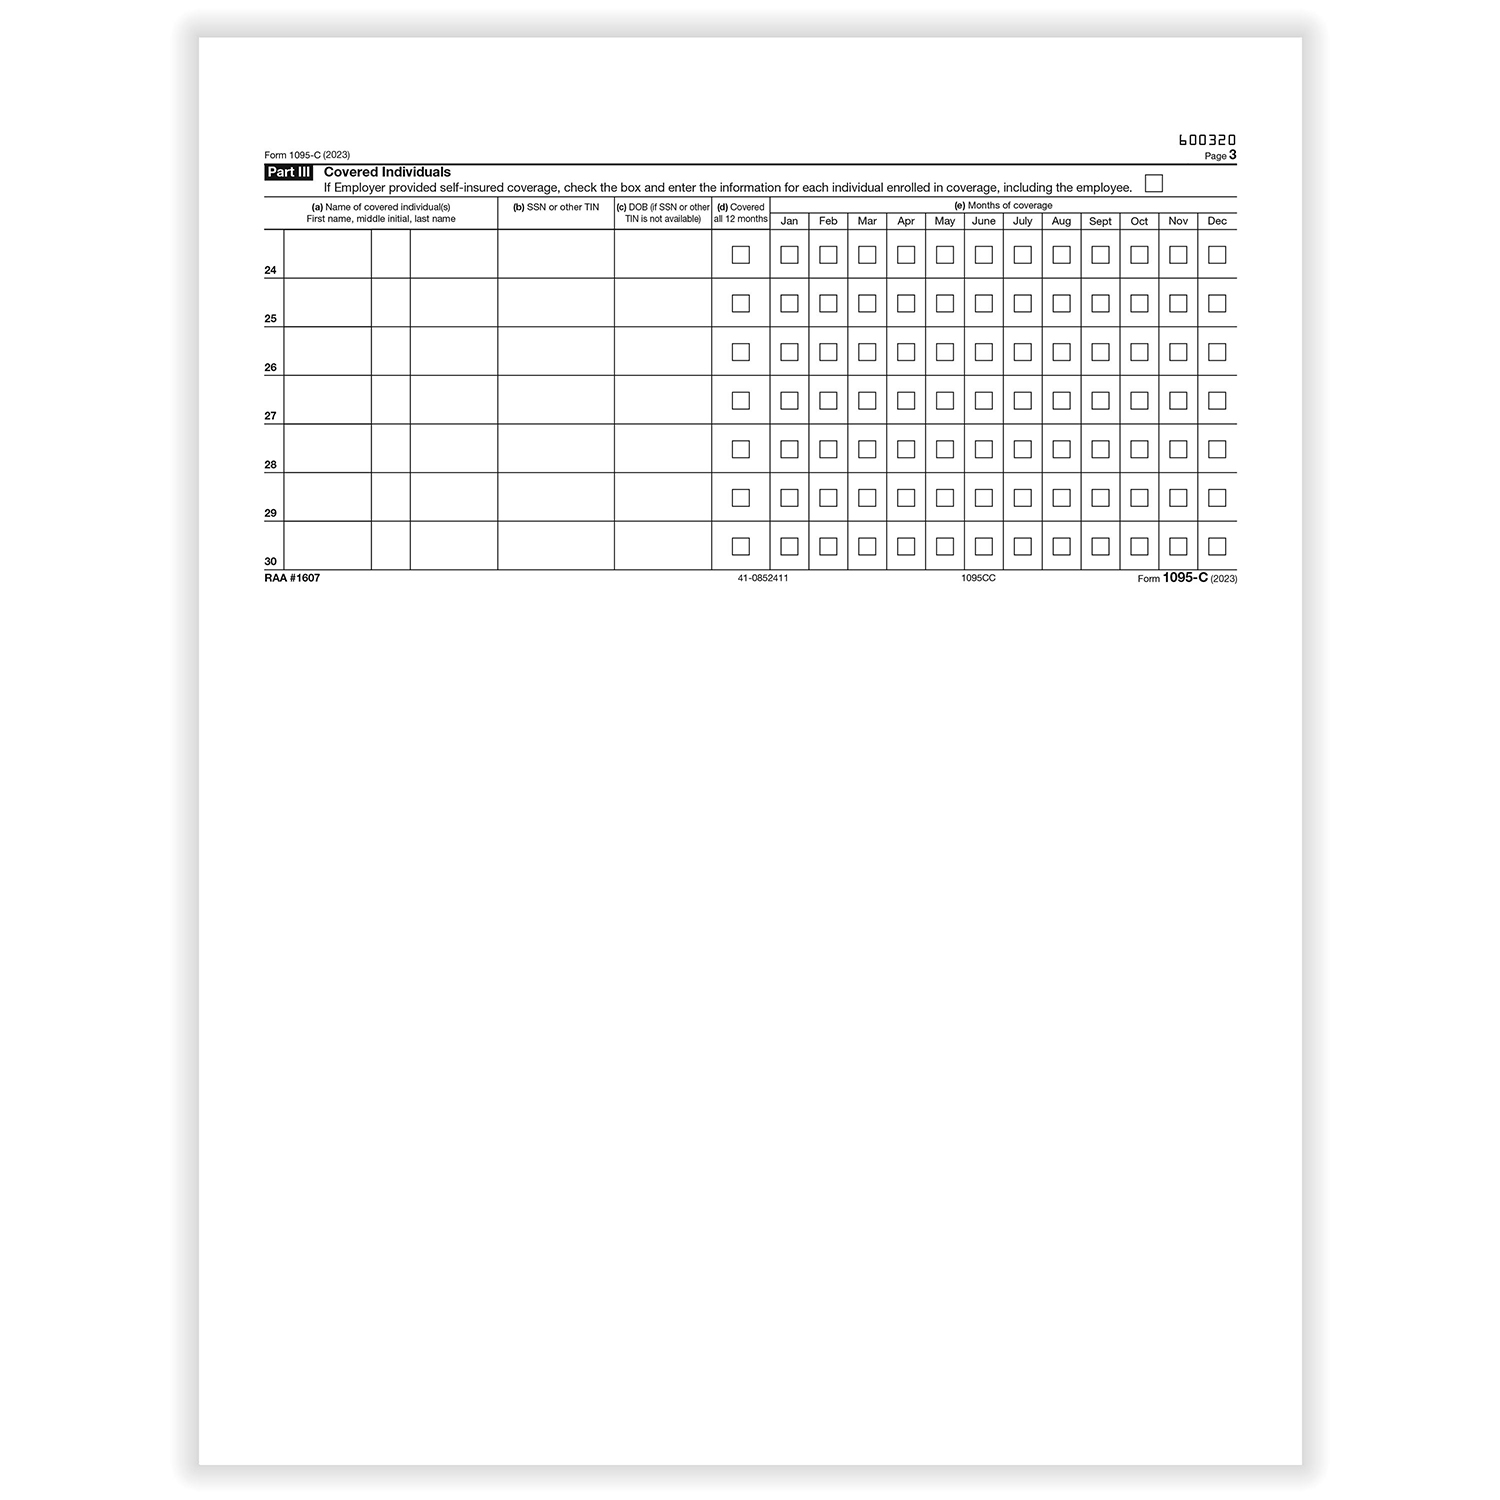 Picture of 1095-C "Employee/Employer" Employer-Provided Health Insurance Offer and Coverage, Continuation, Pack of 50